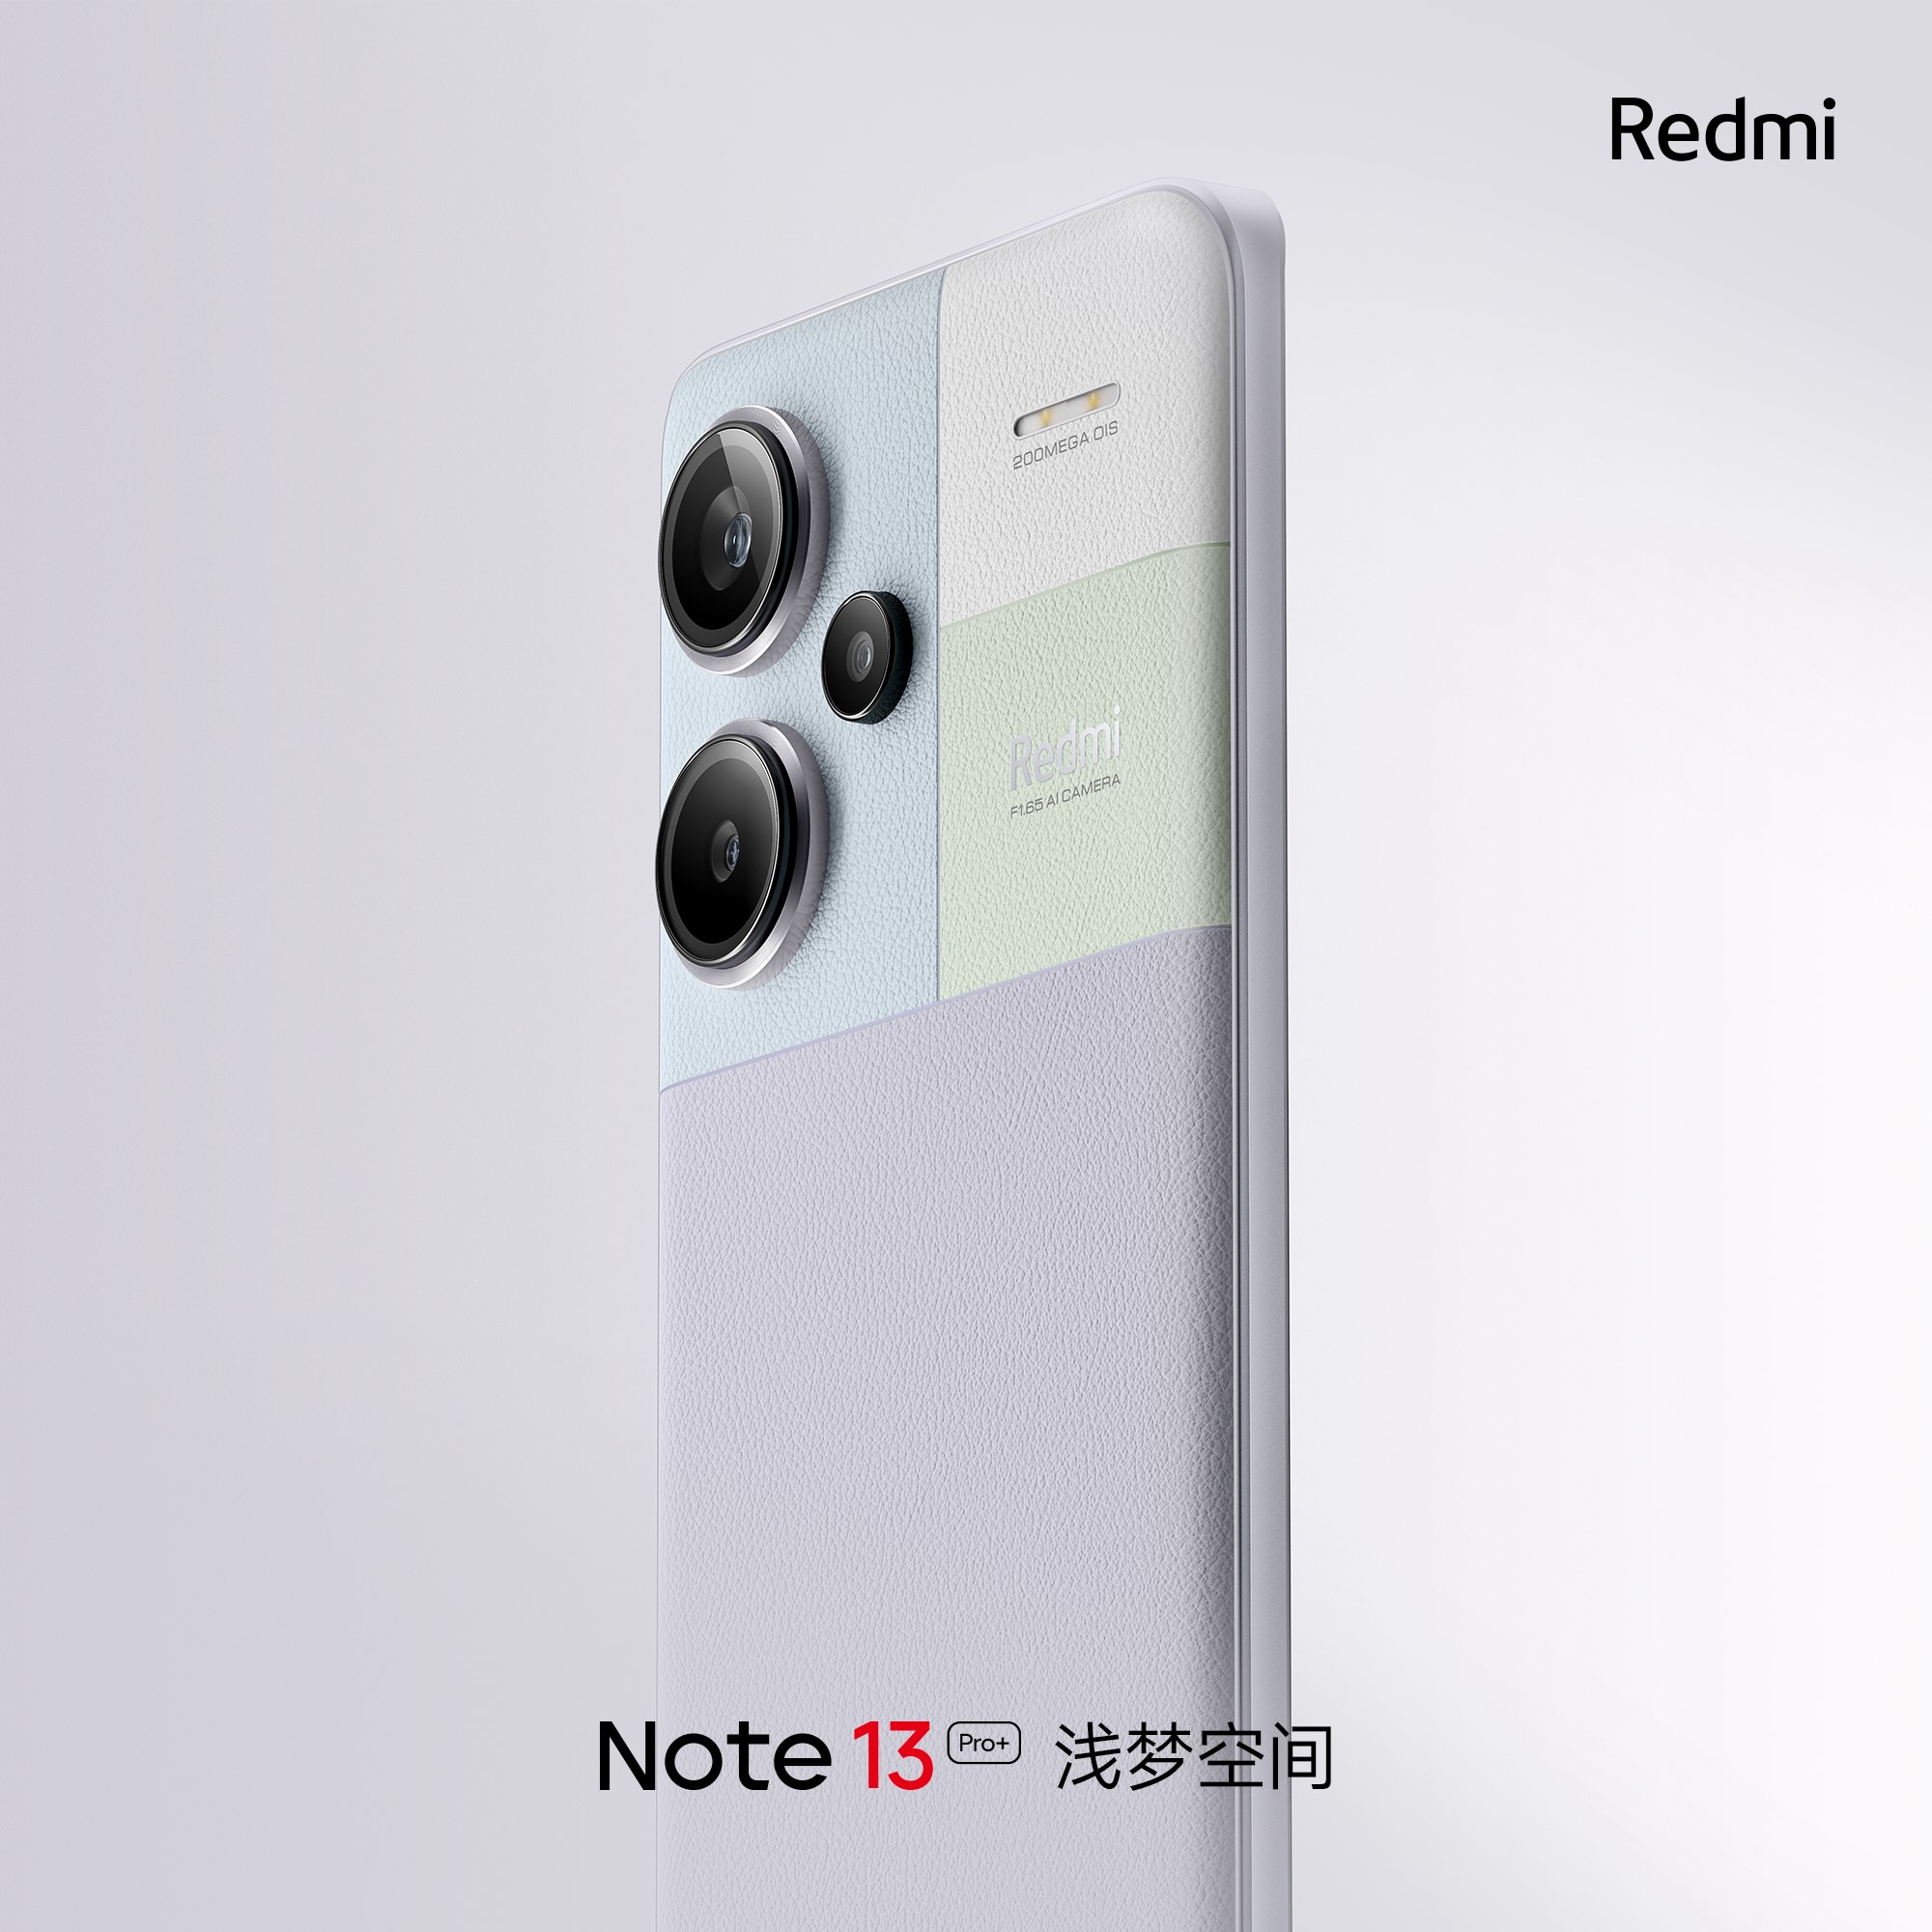 Redmi Note 13 Pro+ Display Specifications Confirmed Ahead of September 21  Launch